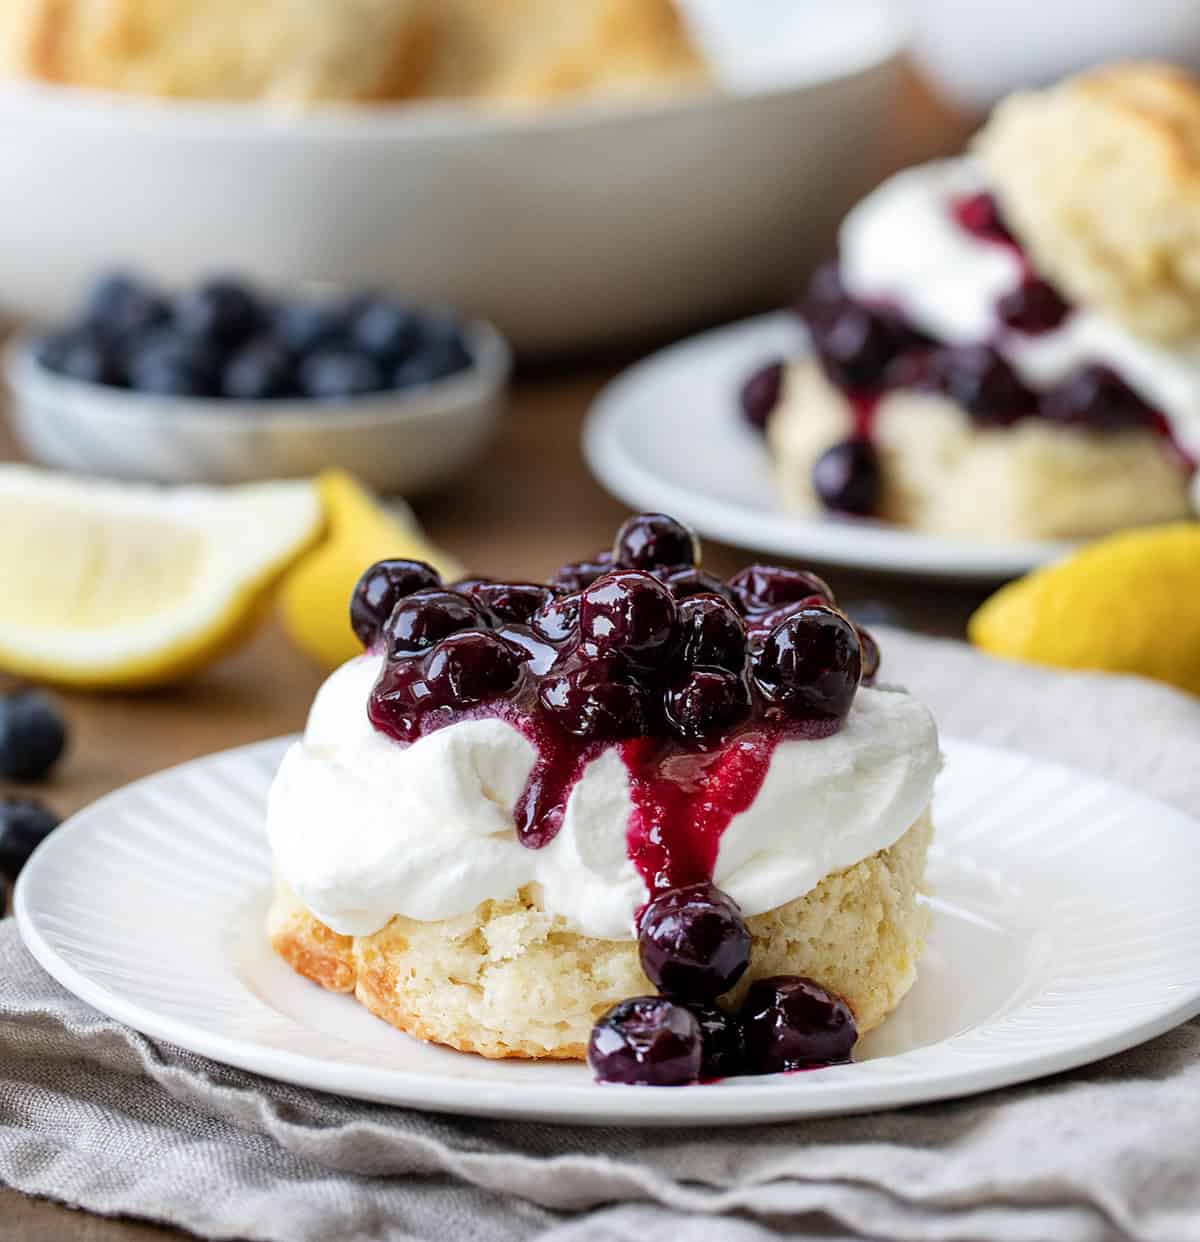 One half of a biscuit topped with whipped cream and blueberry sauce on a white plate on a wooden table with other ingredients surrounding.